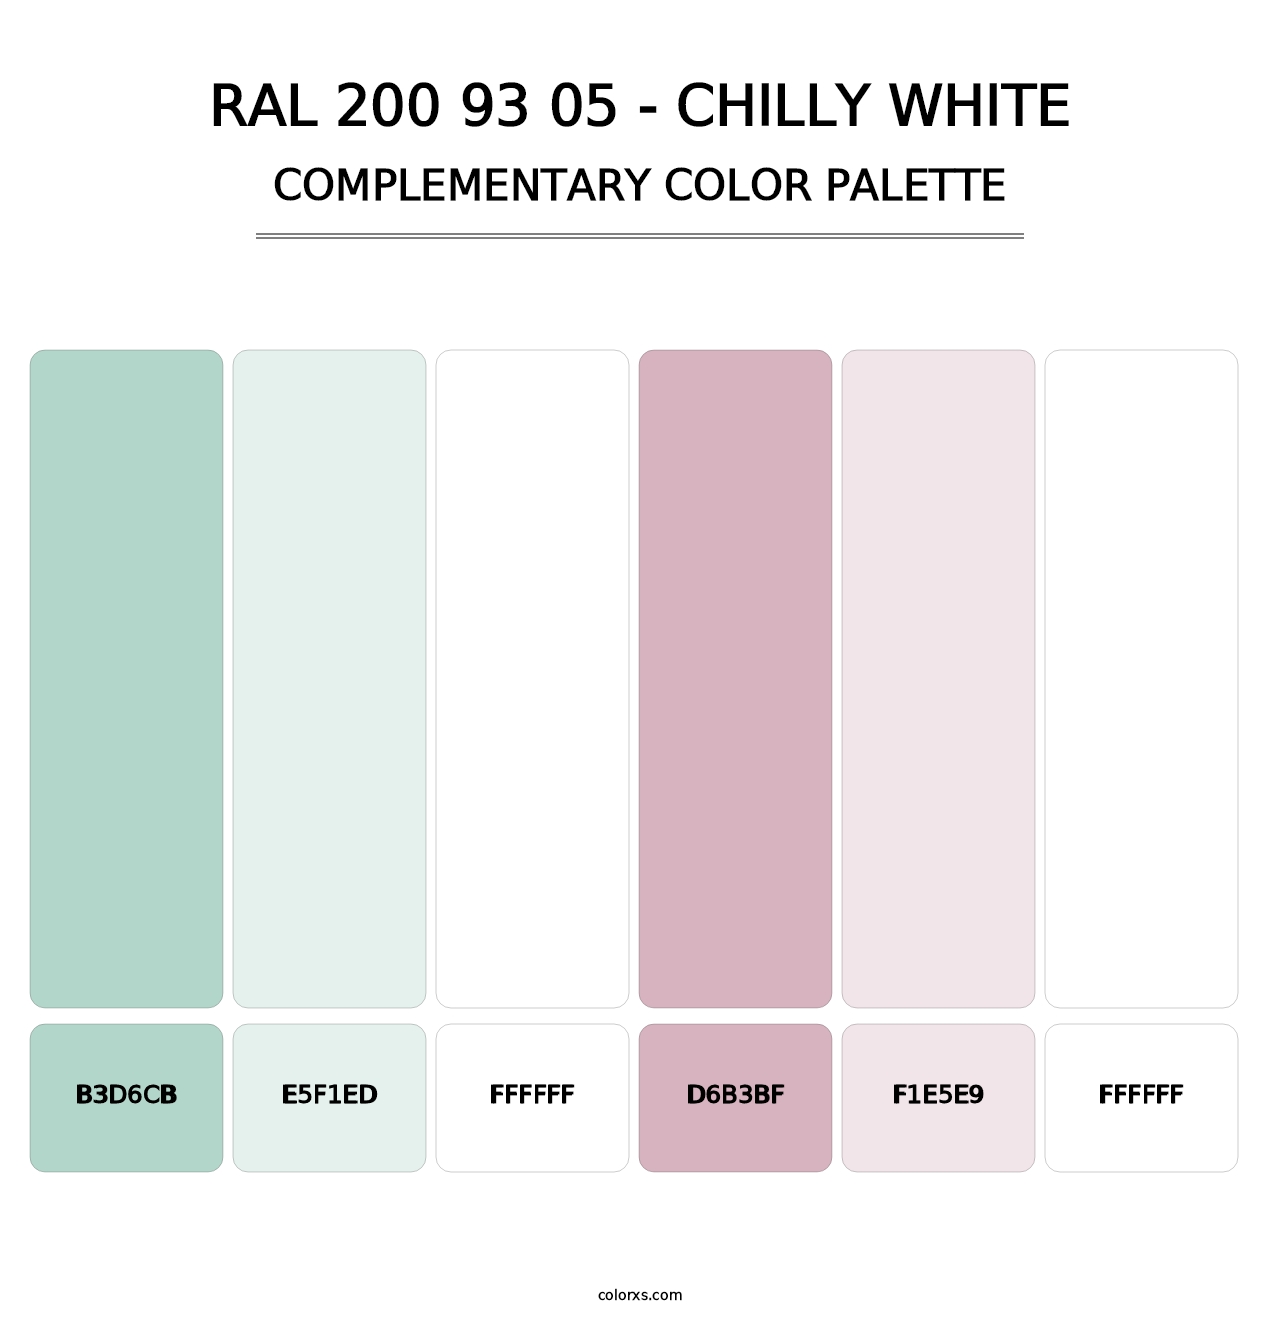 RAL 200 93 05 - Chilly White - Complementary Color Palette